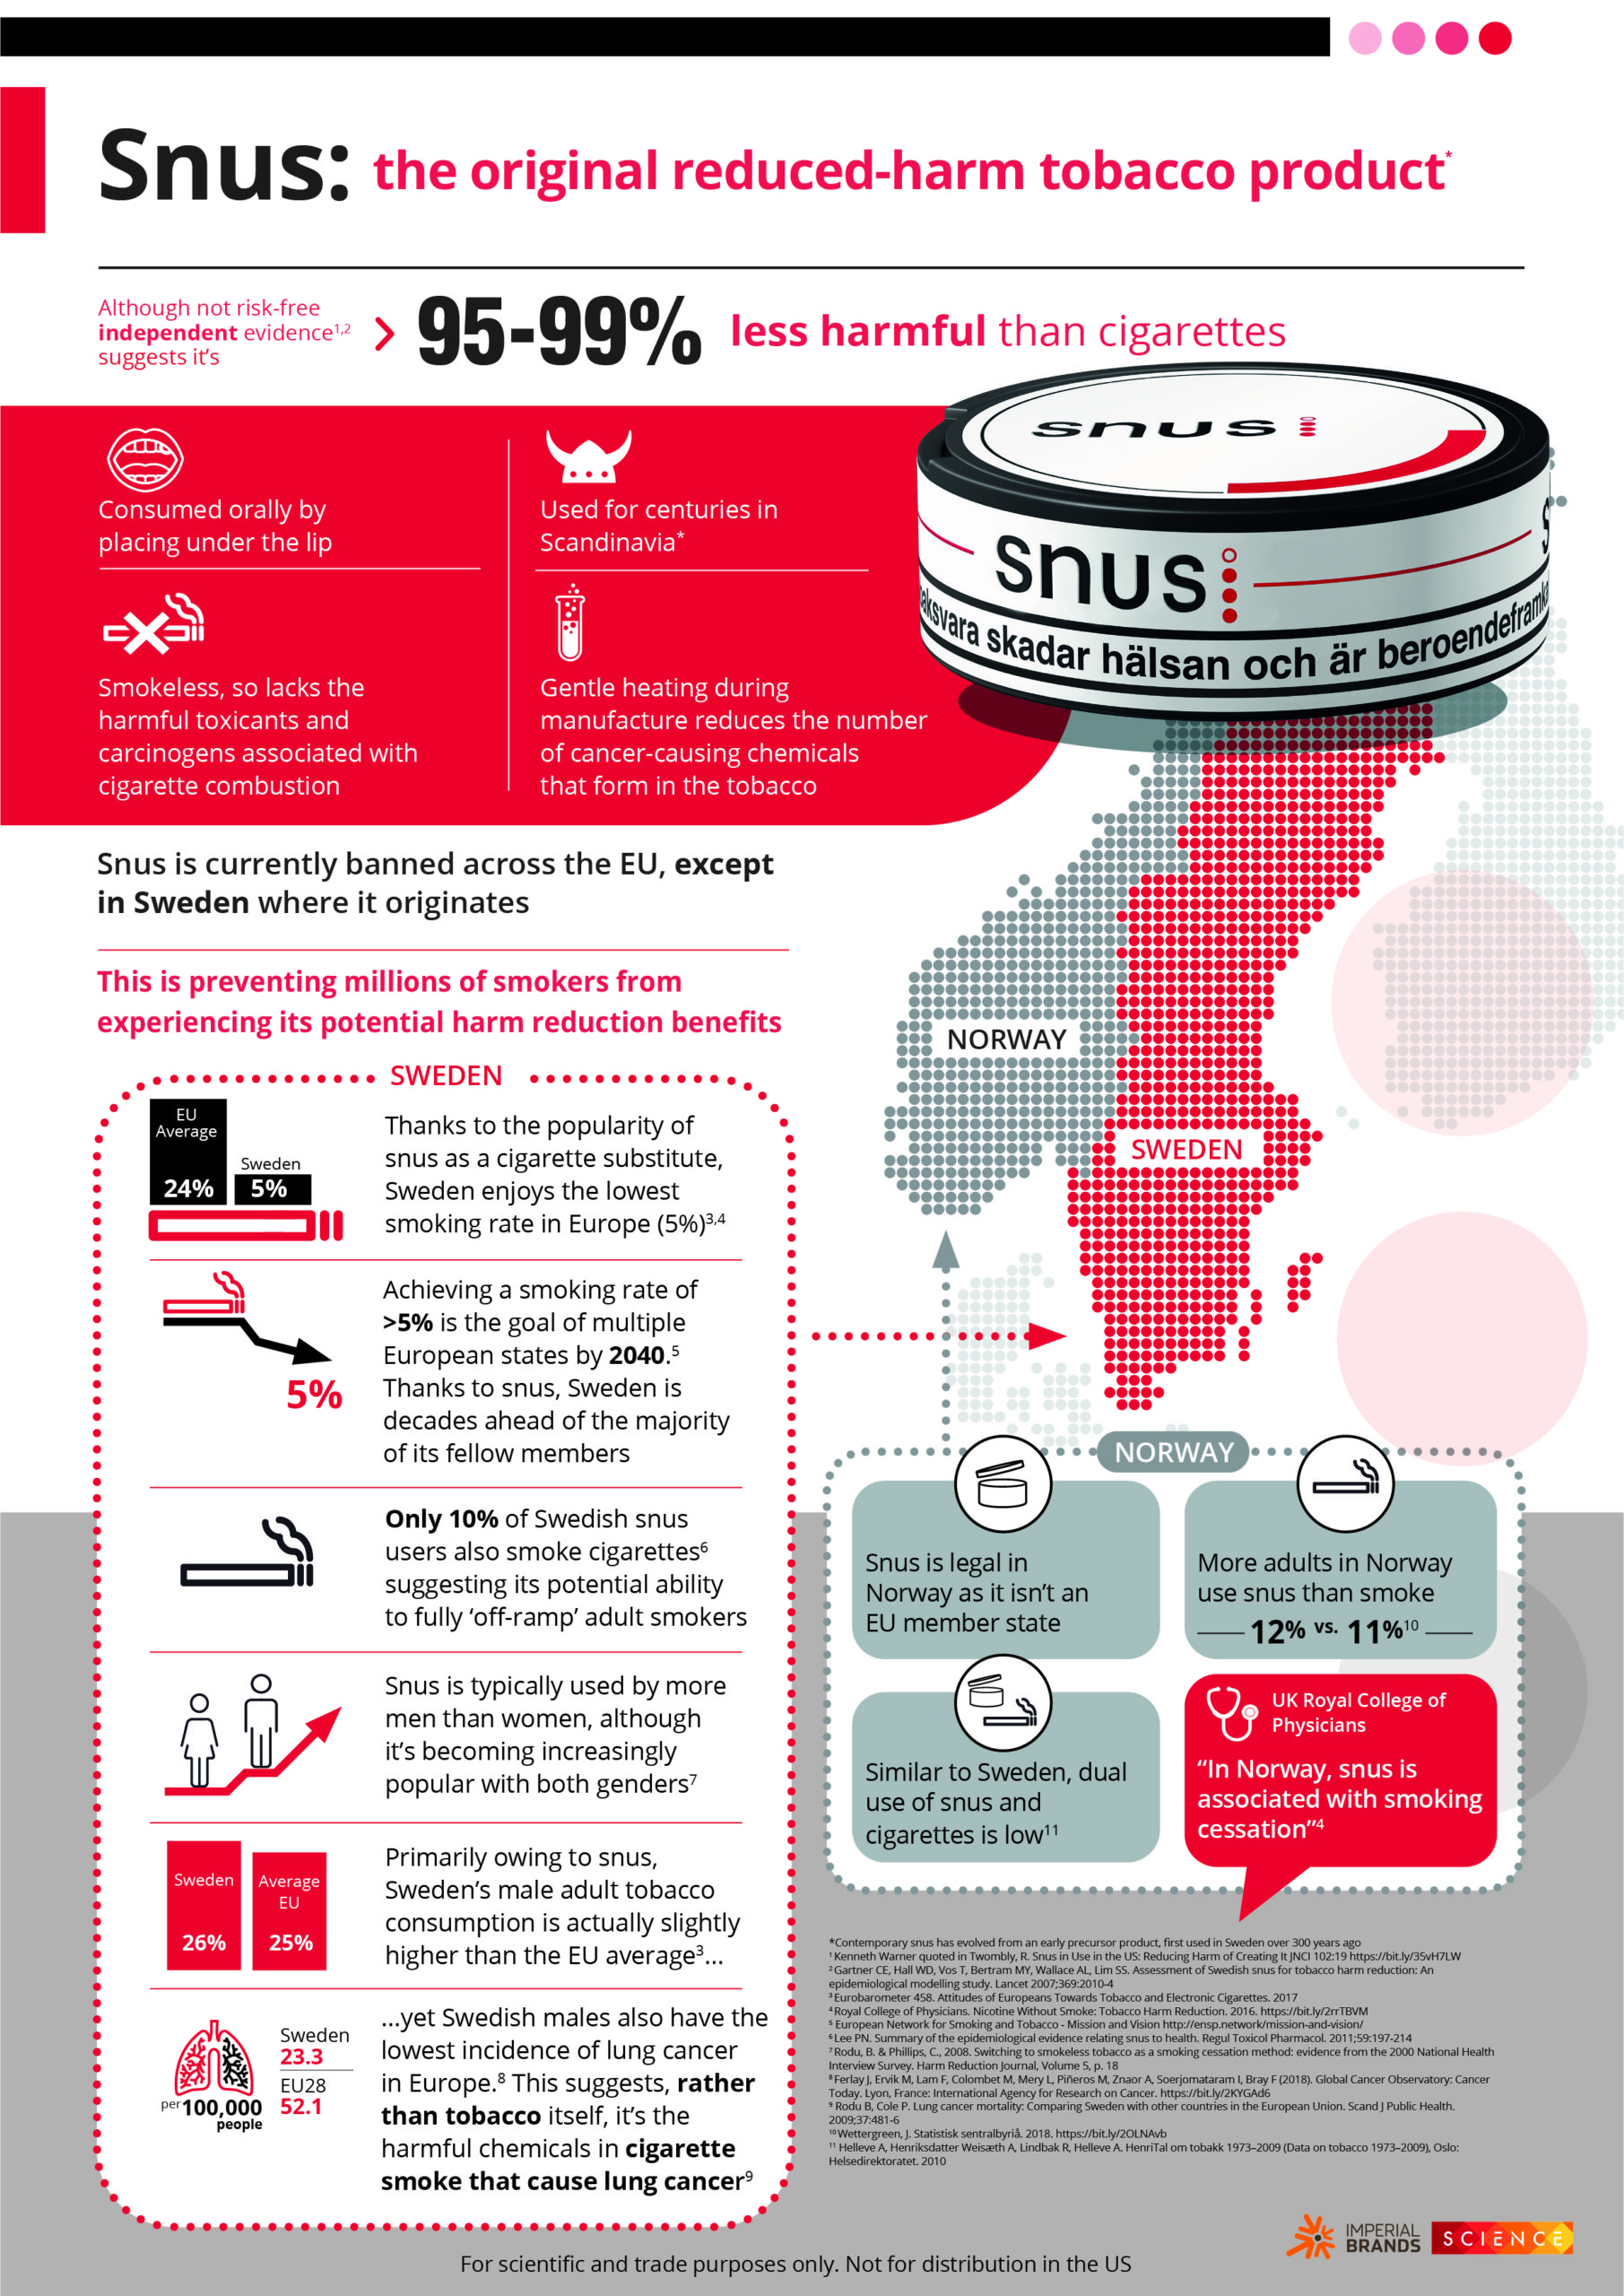 Snus and the EU – a golden public health opportunity?